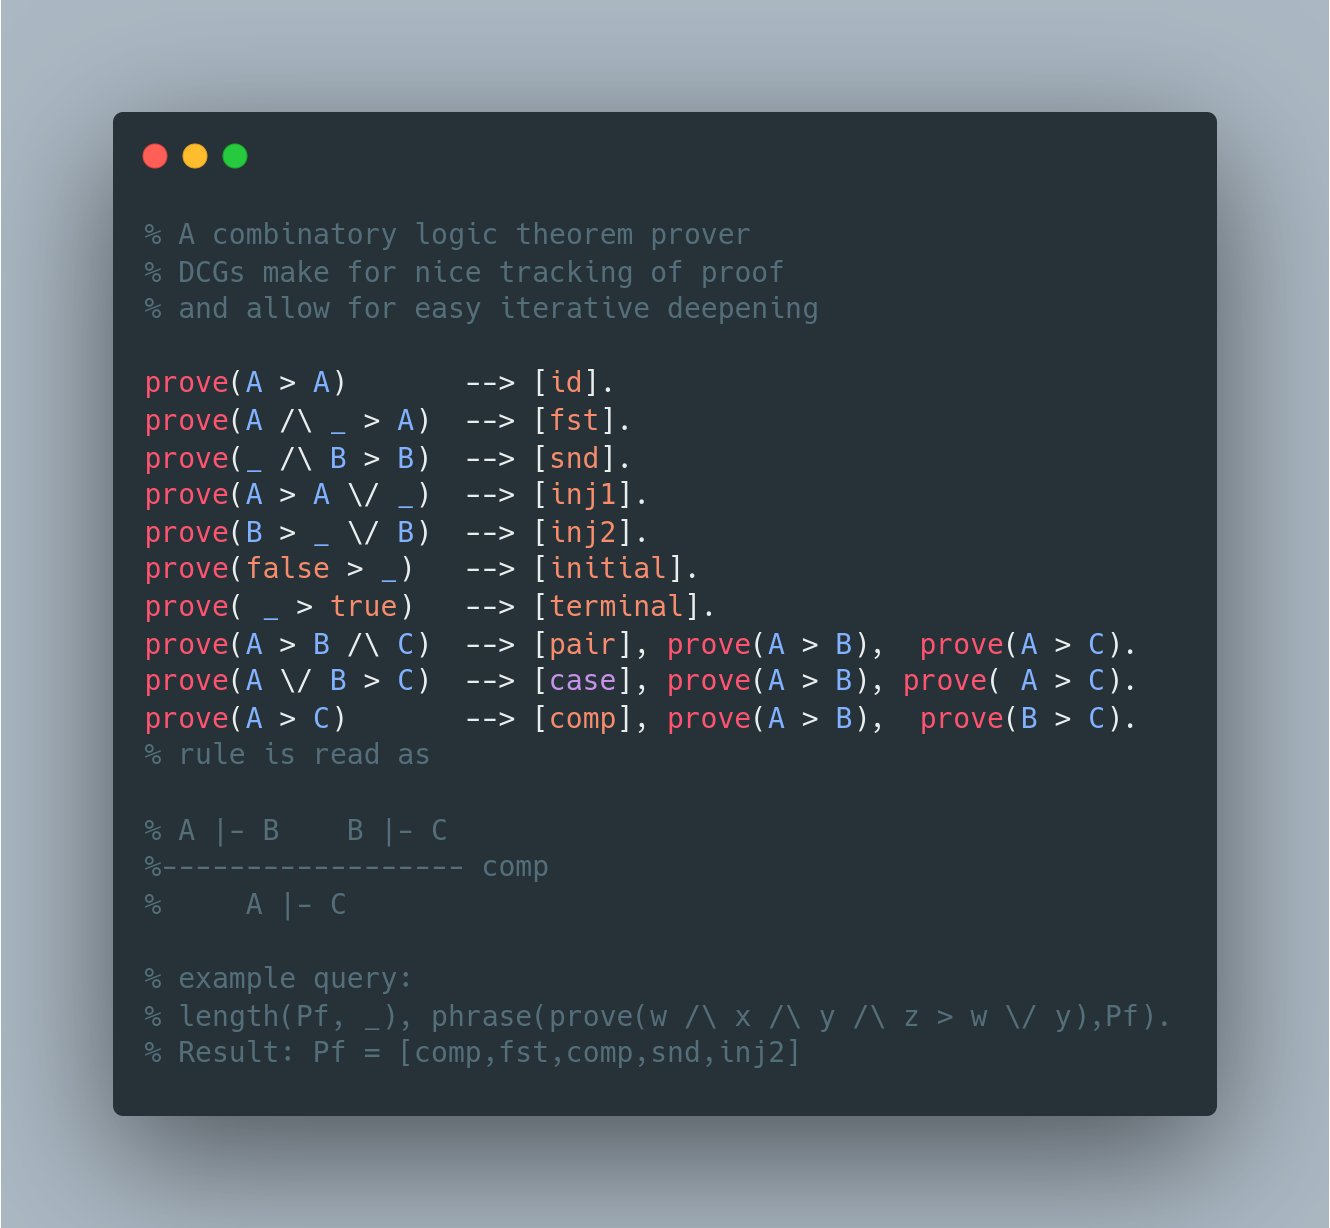 A fun usage of definite clause grammars  https:// metalevel.at/prolog/dcg in prolog. A little category flavored combinatory logic prover. DCG tracks p